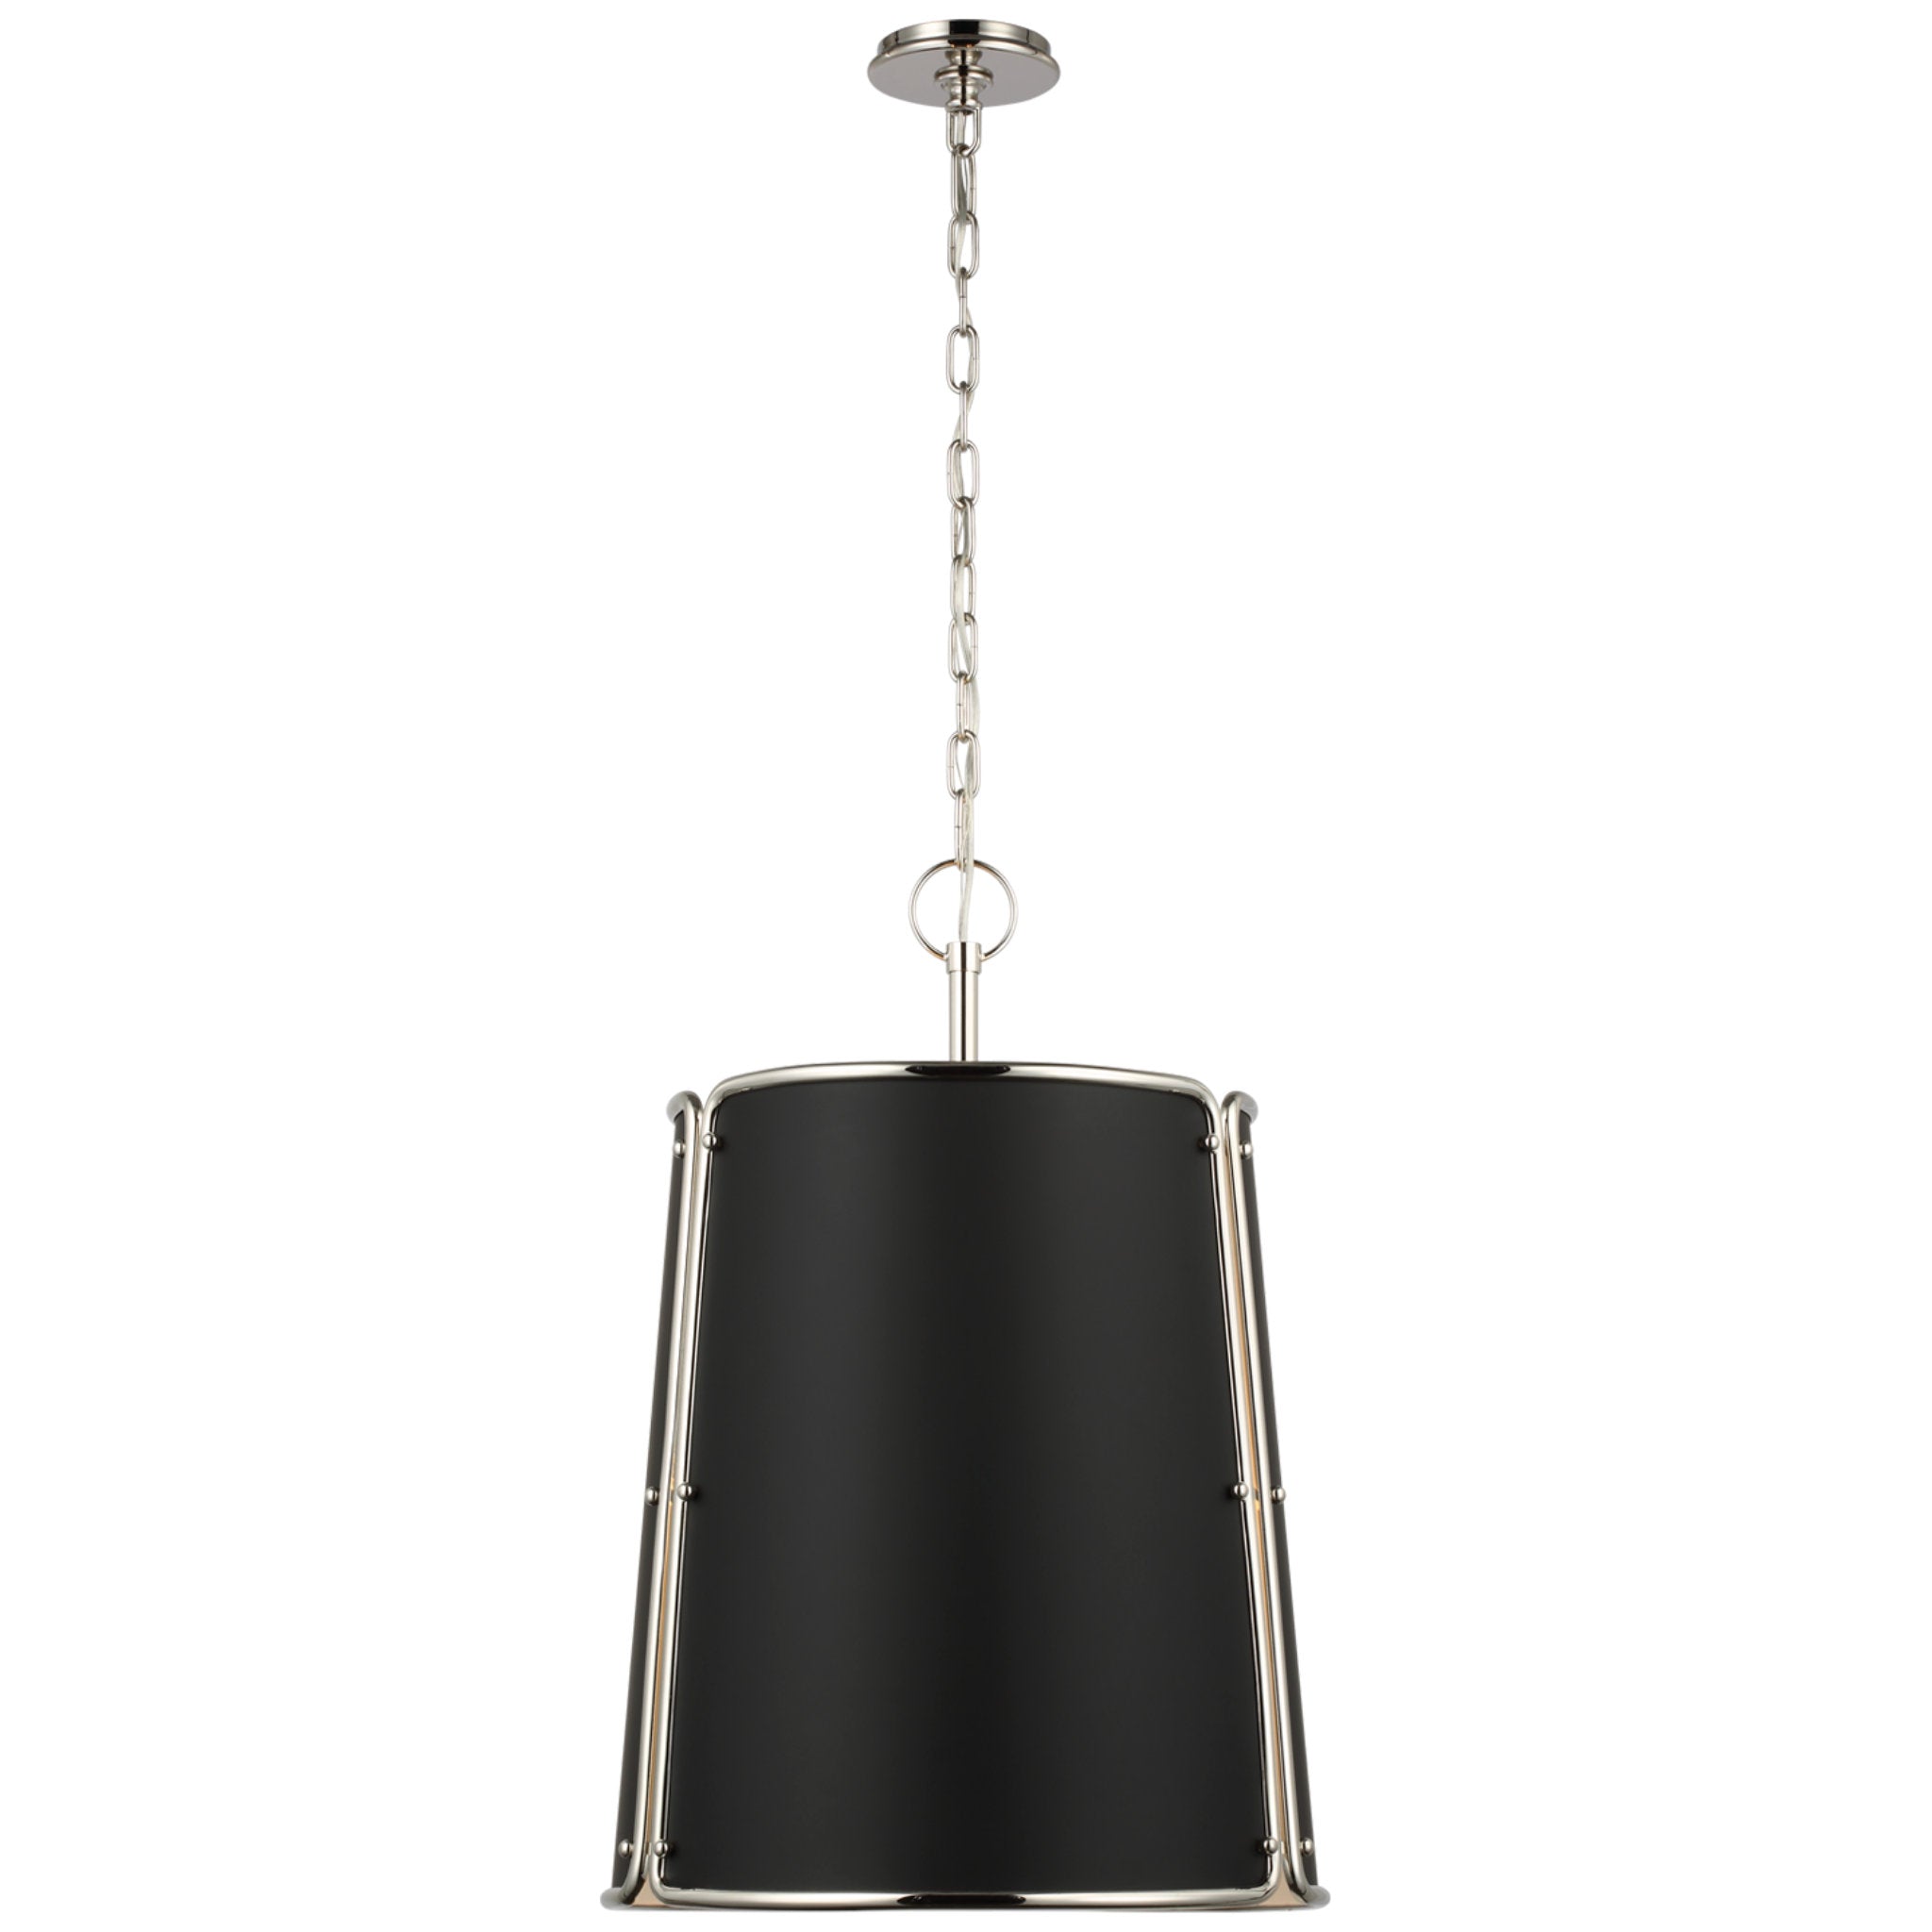 Carrier and Company Hastings Medium Pendant in Polished Nickel with Black Shade